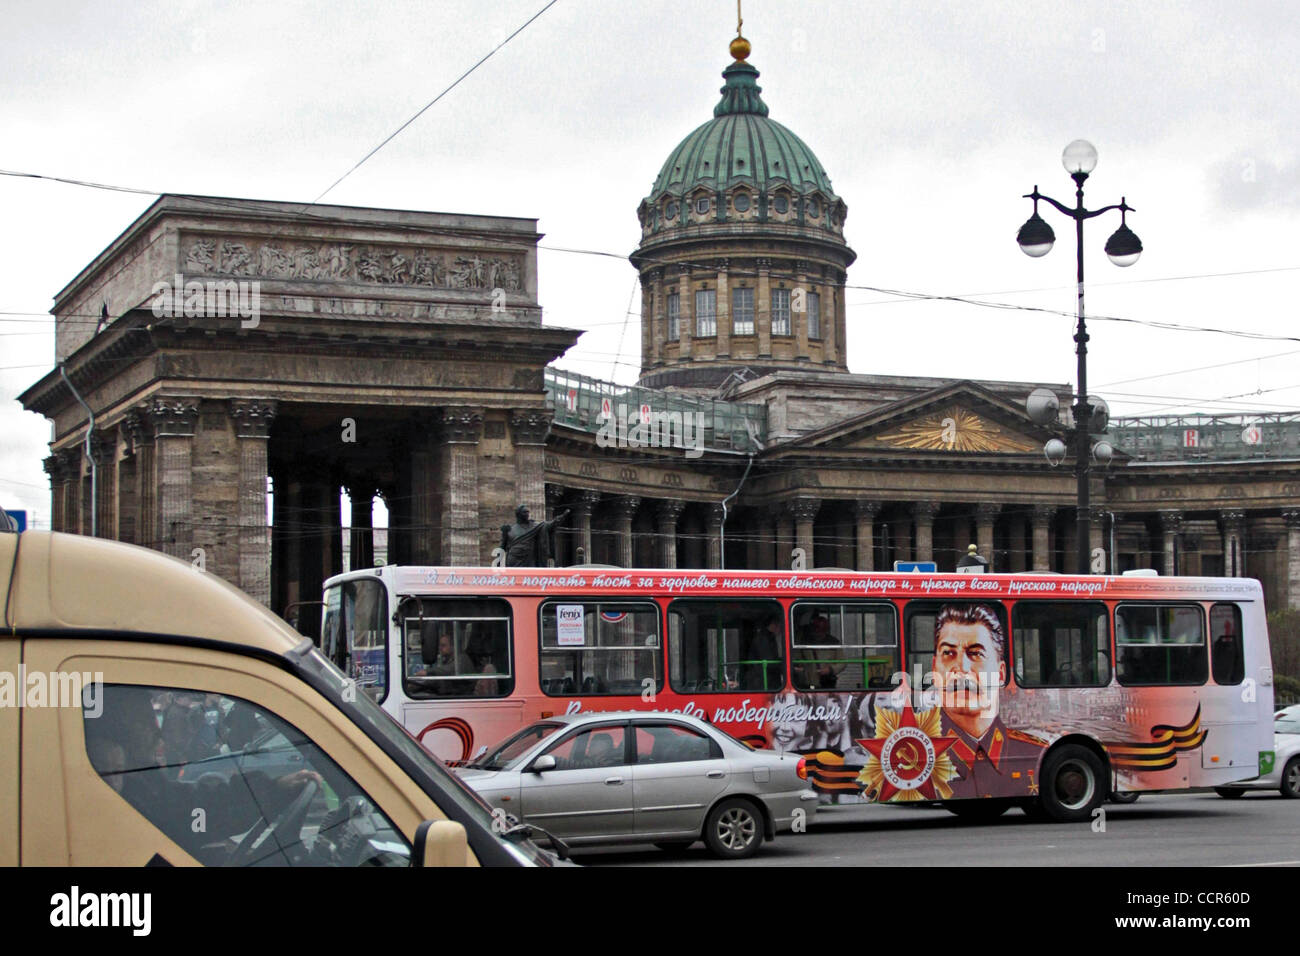 may-5th2010a-public-bus-no187-in-st-petersburg-drove-its-route-through-CCR60D.jpg